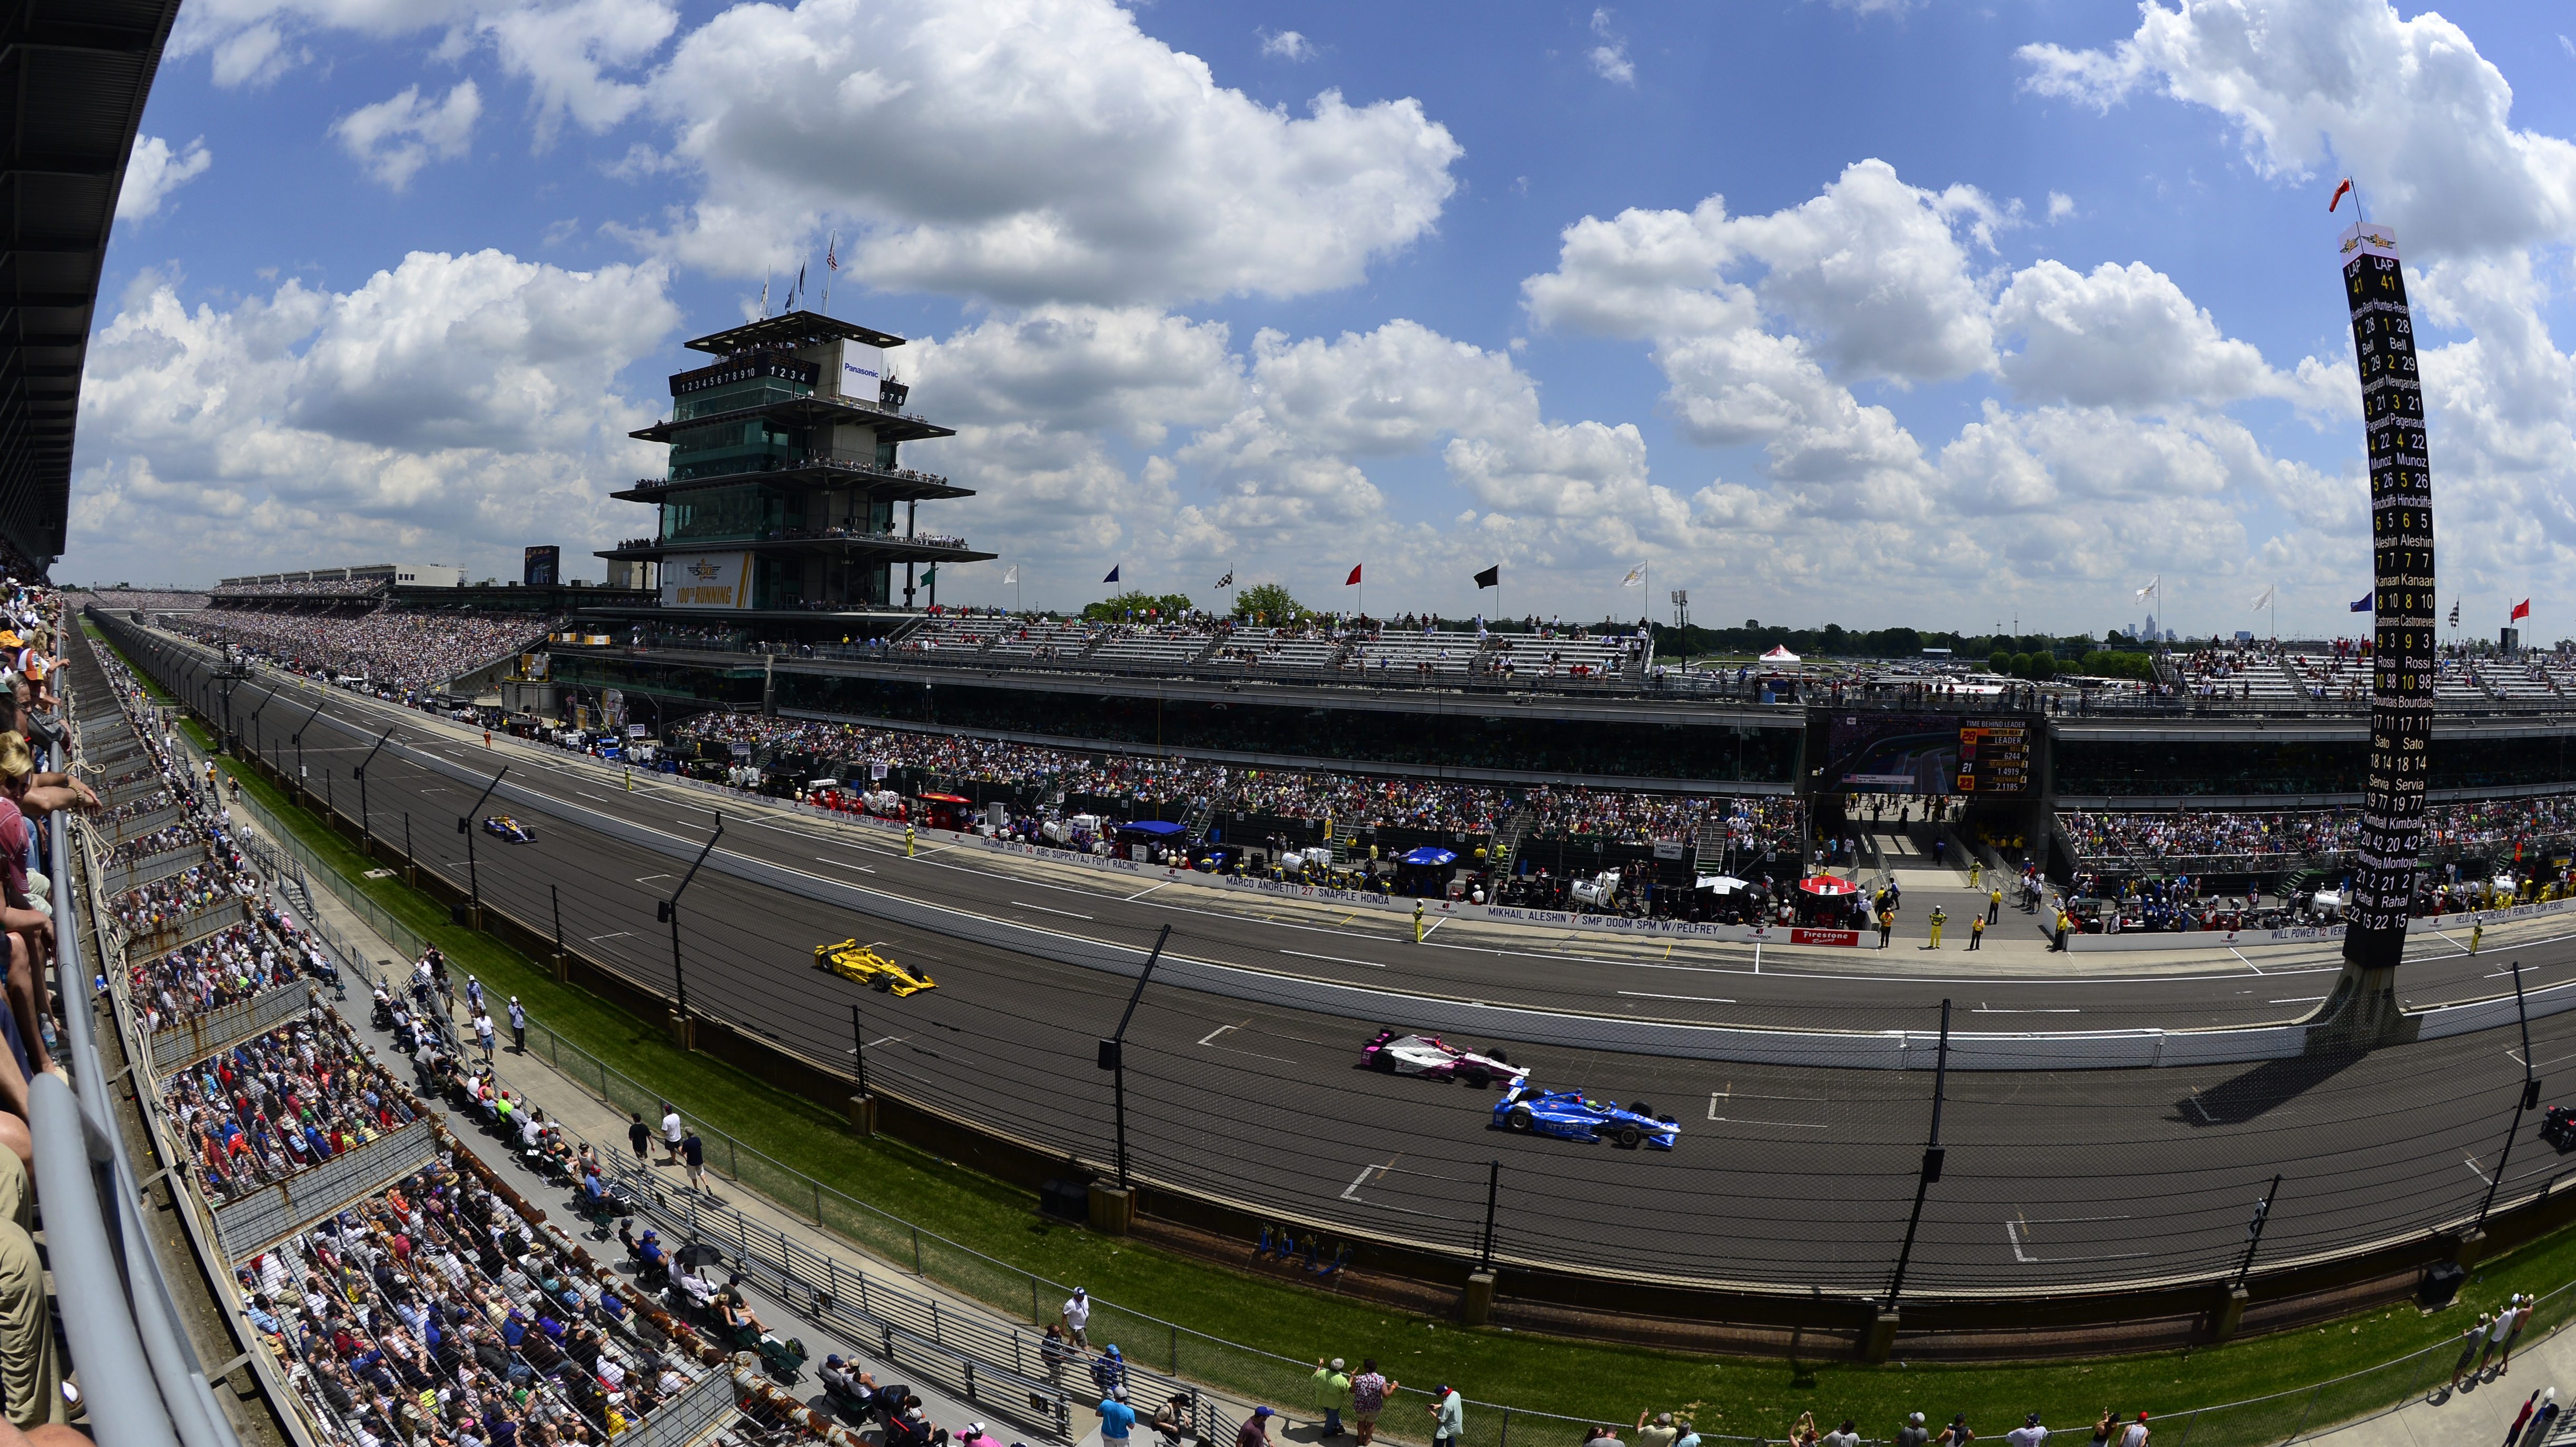 Indy 500 Schedule Date, Start Time & Full List of Events